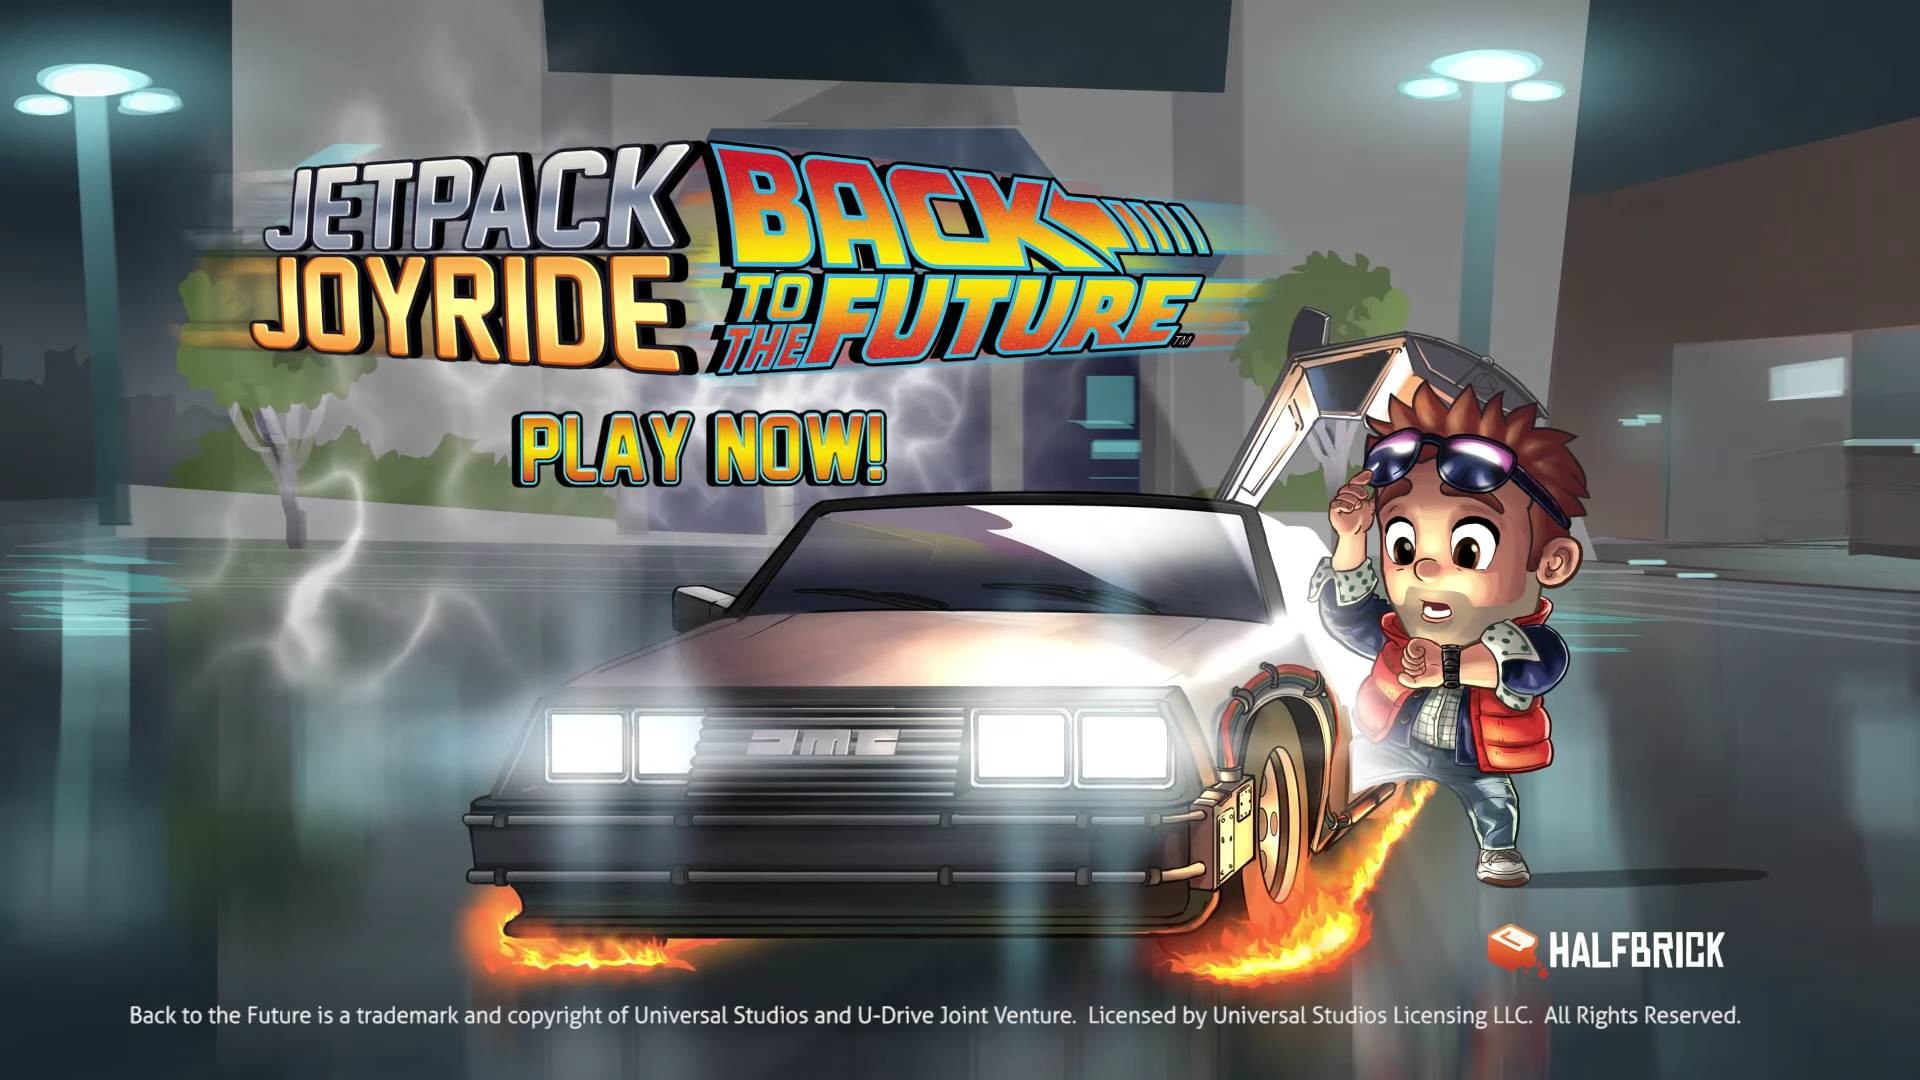 Back to the Future has invaded Halfbrick's "Jetpack Joyride"